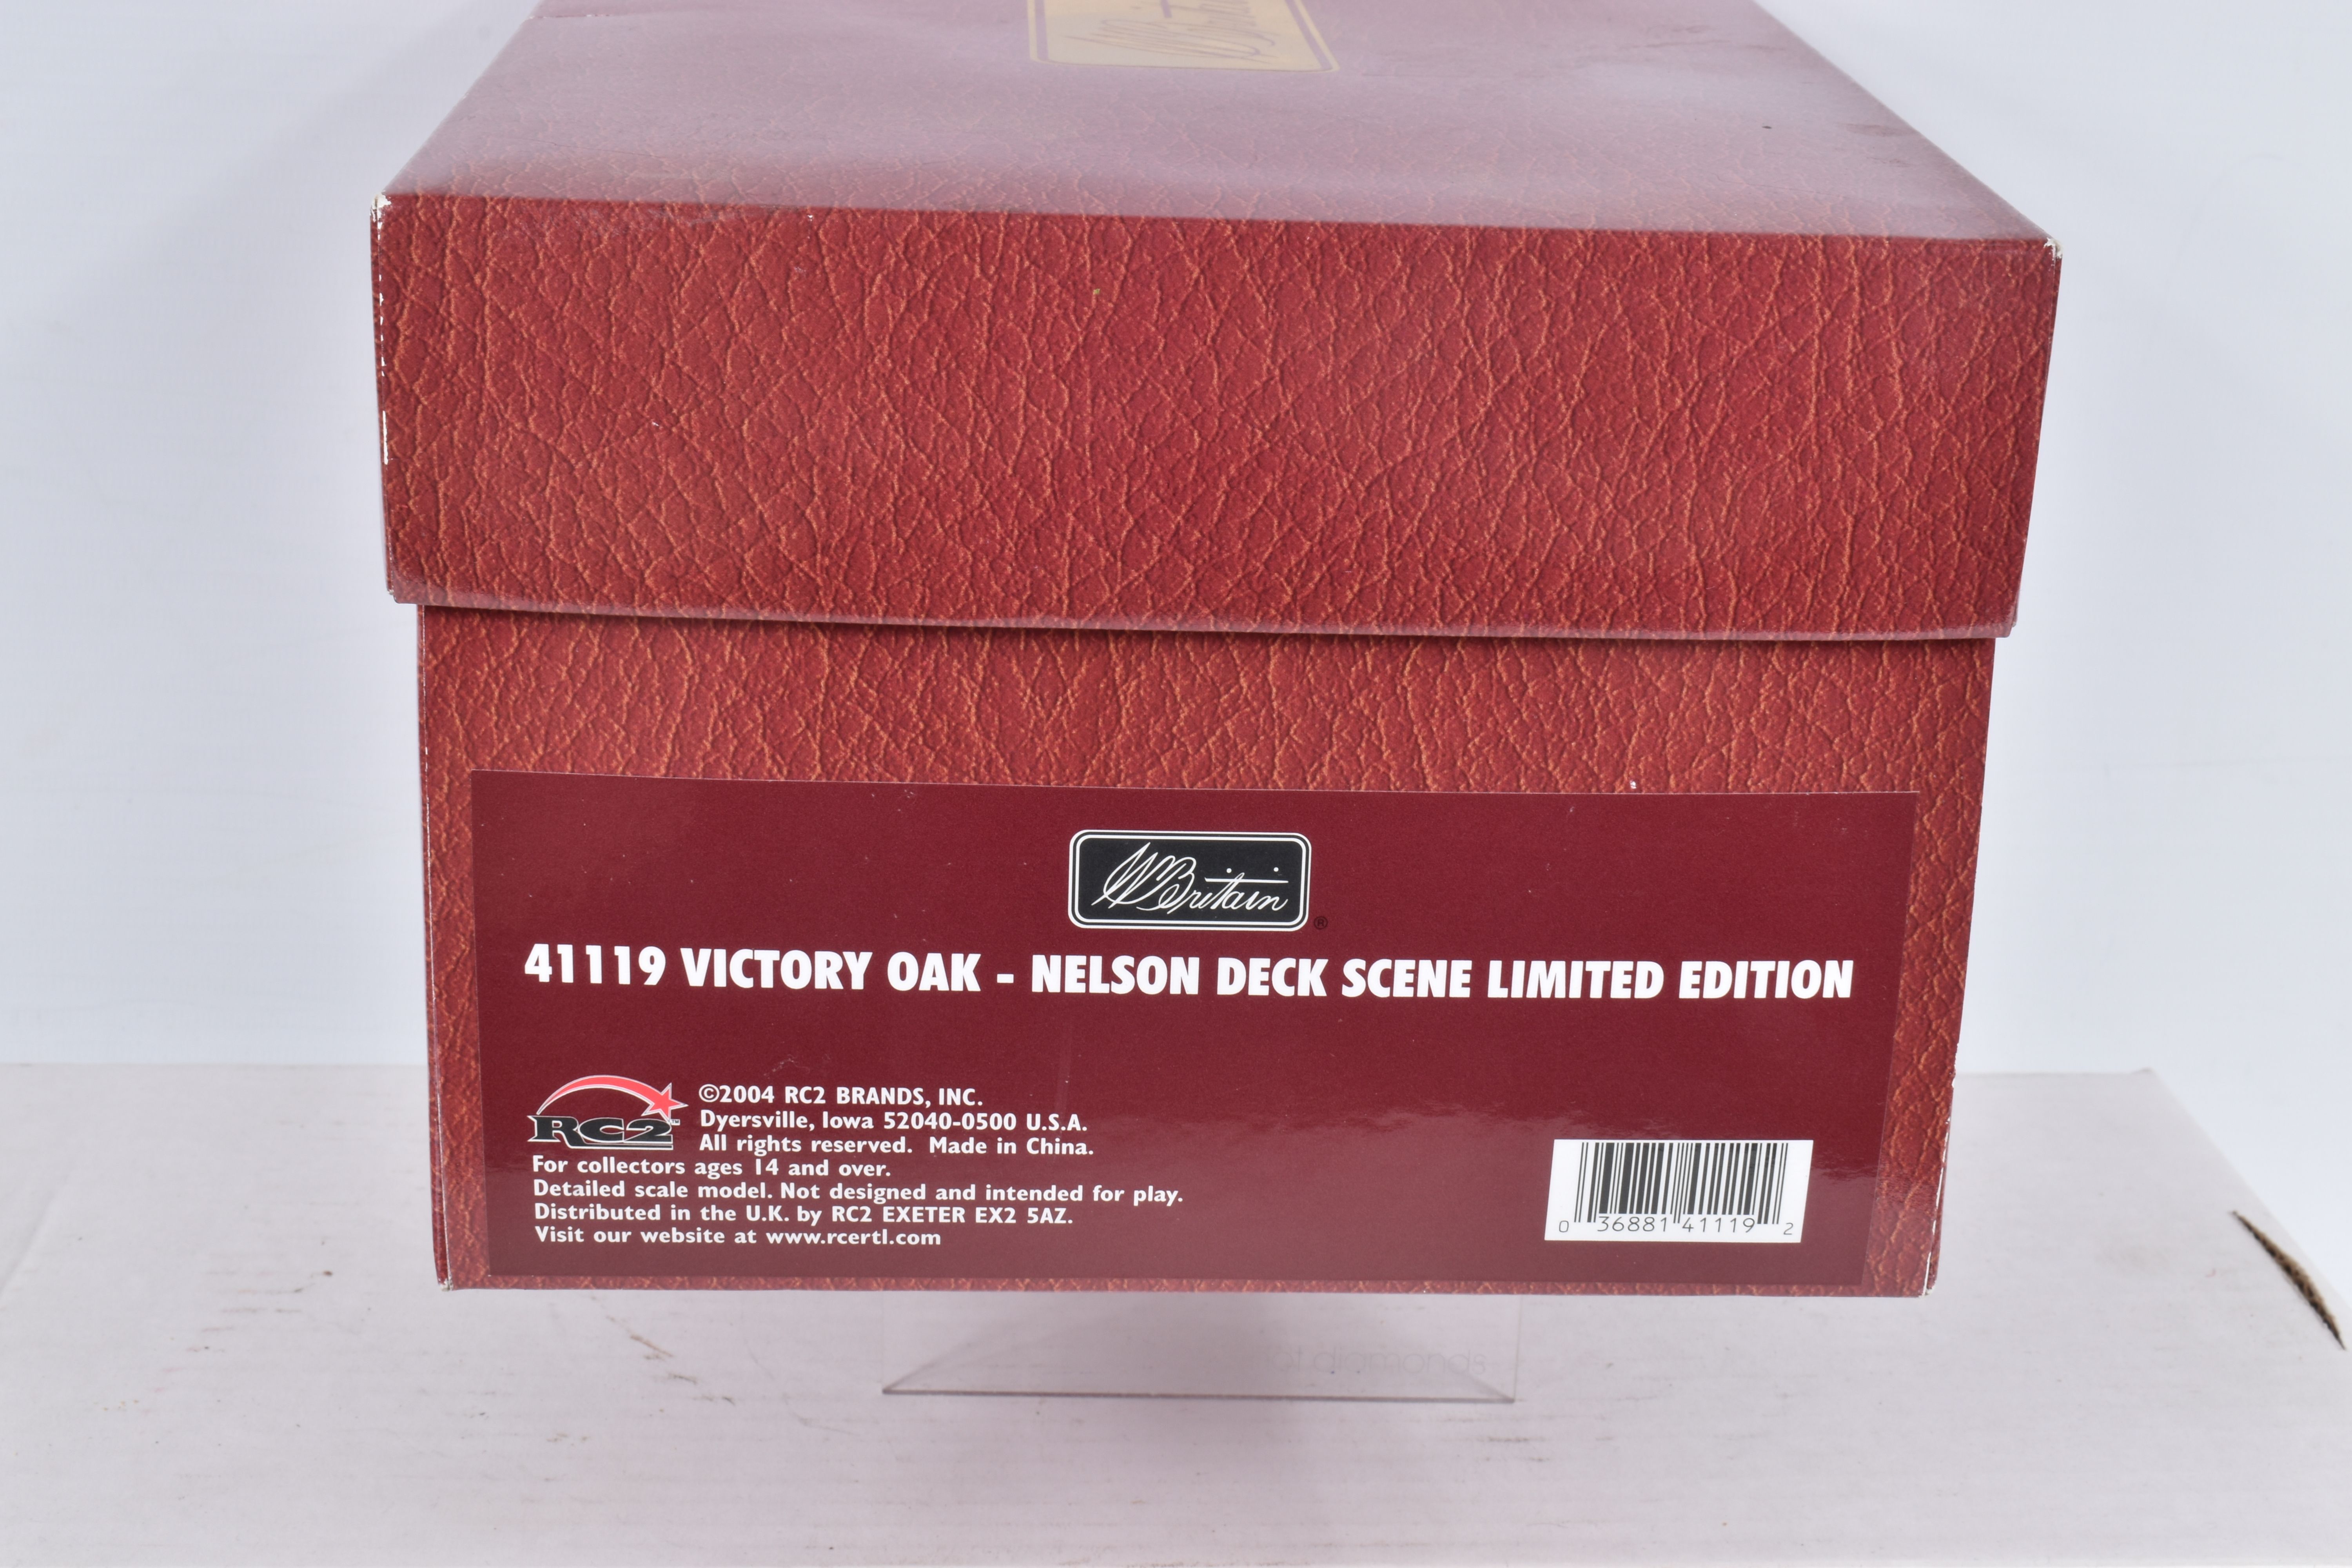 TWO BOXED NAPOLEONIC BRITAINS SCENE SETS, the first a 41119 Victory Oak Nelson Deck scene, - Image 6 of 10